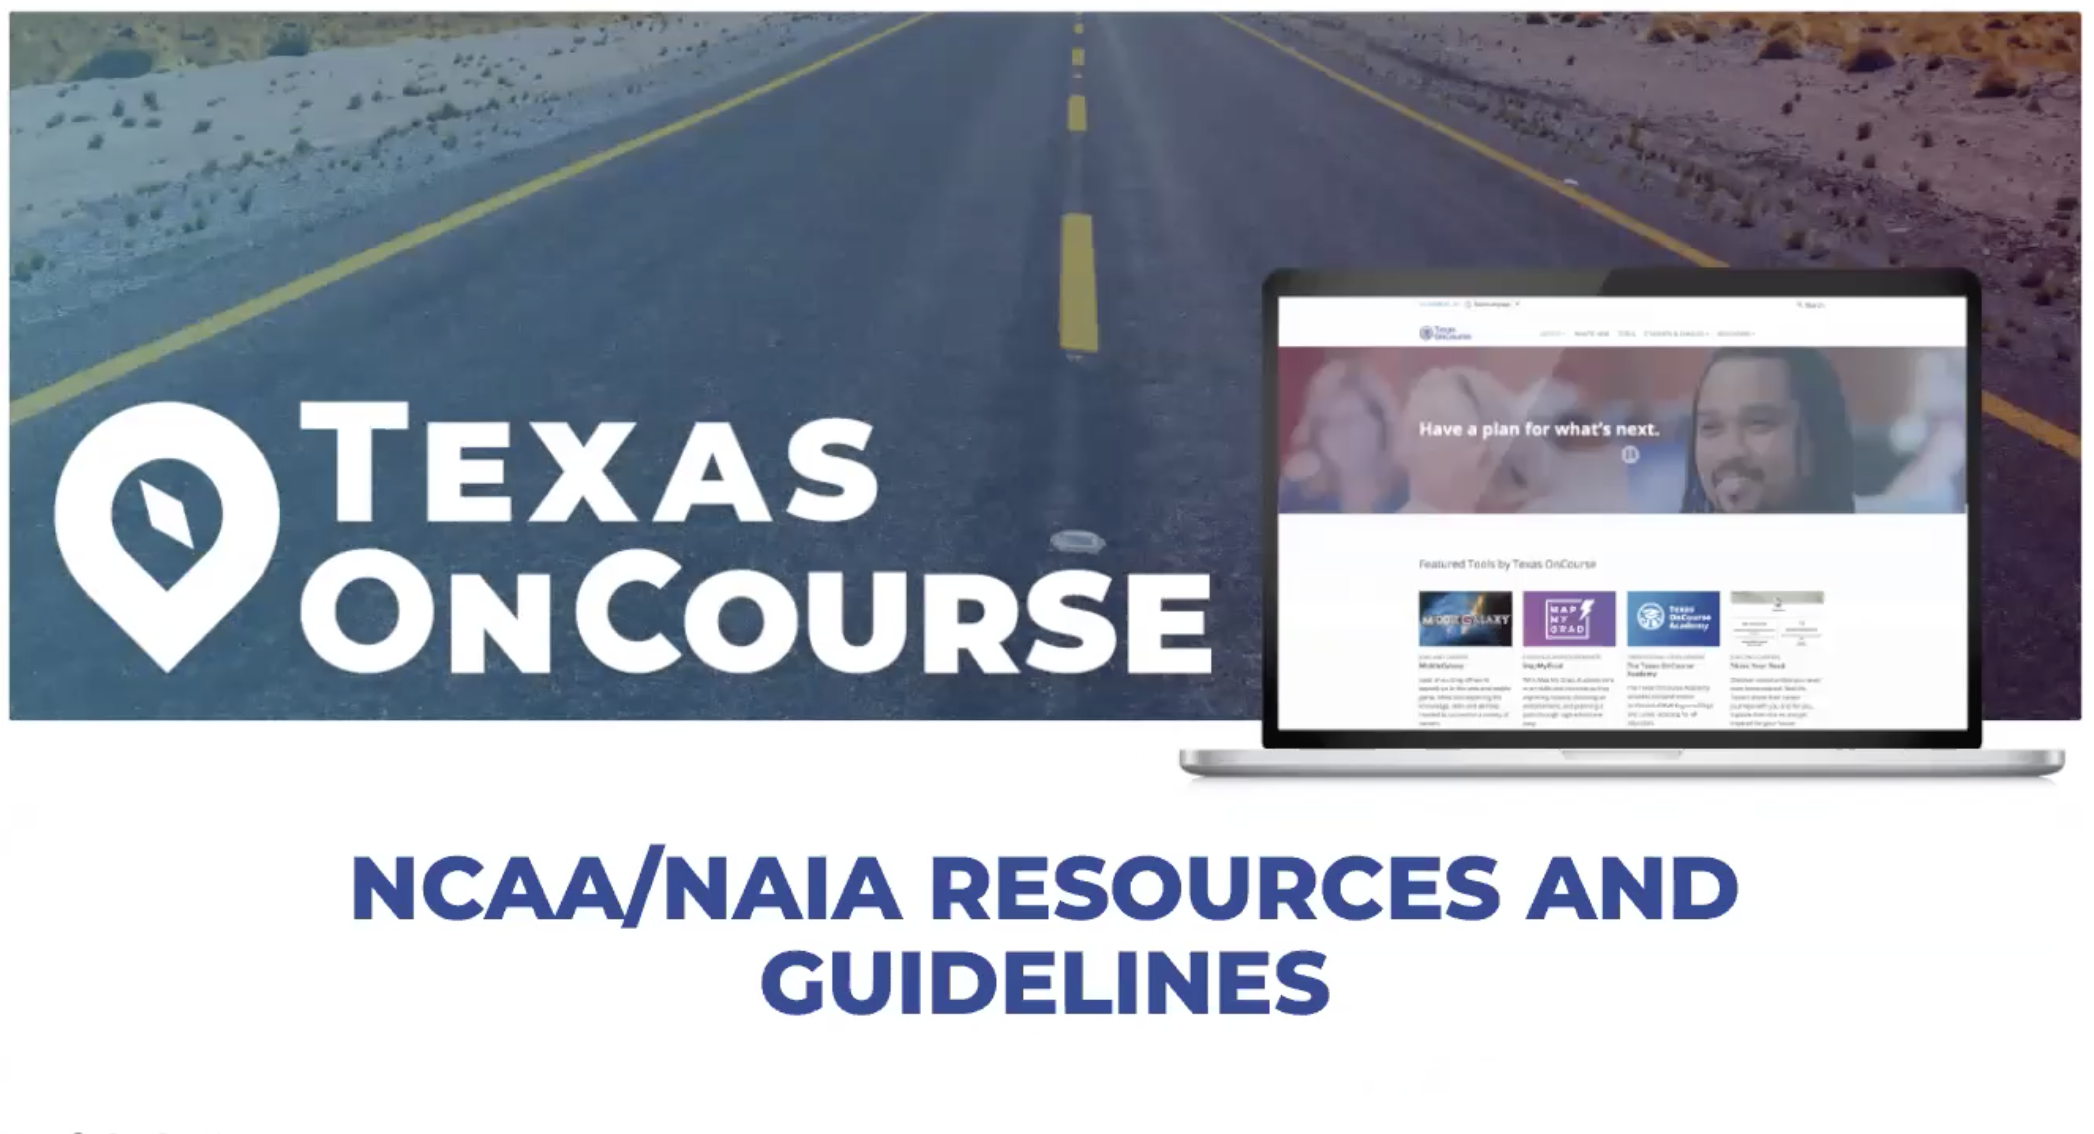 NCAA/NAIA Resources and Guidelines